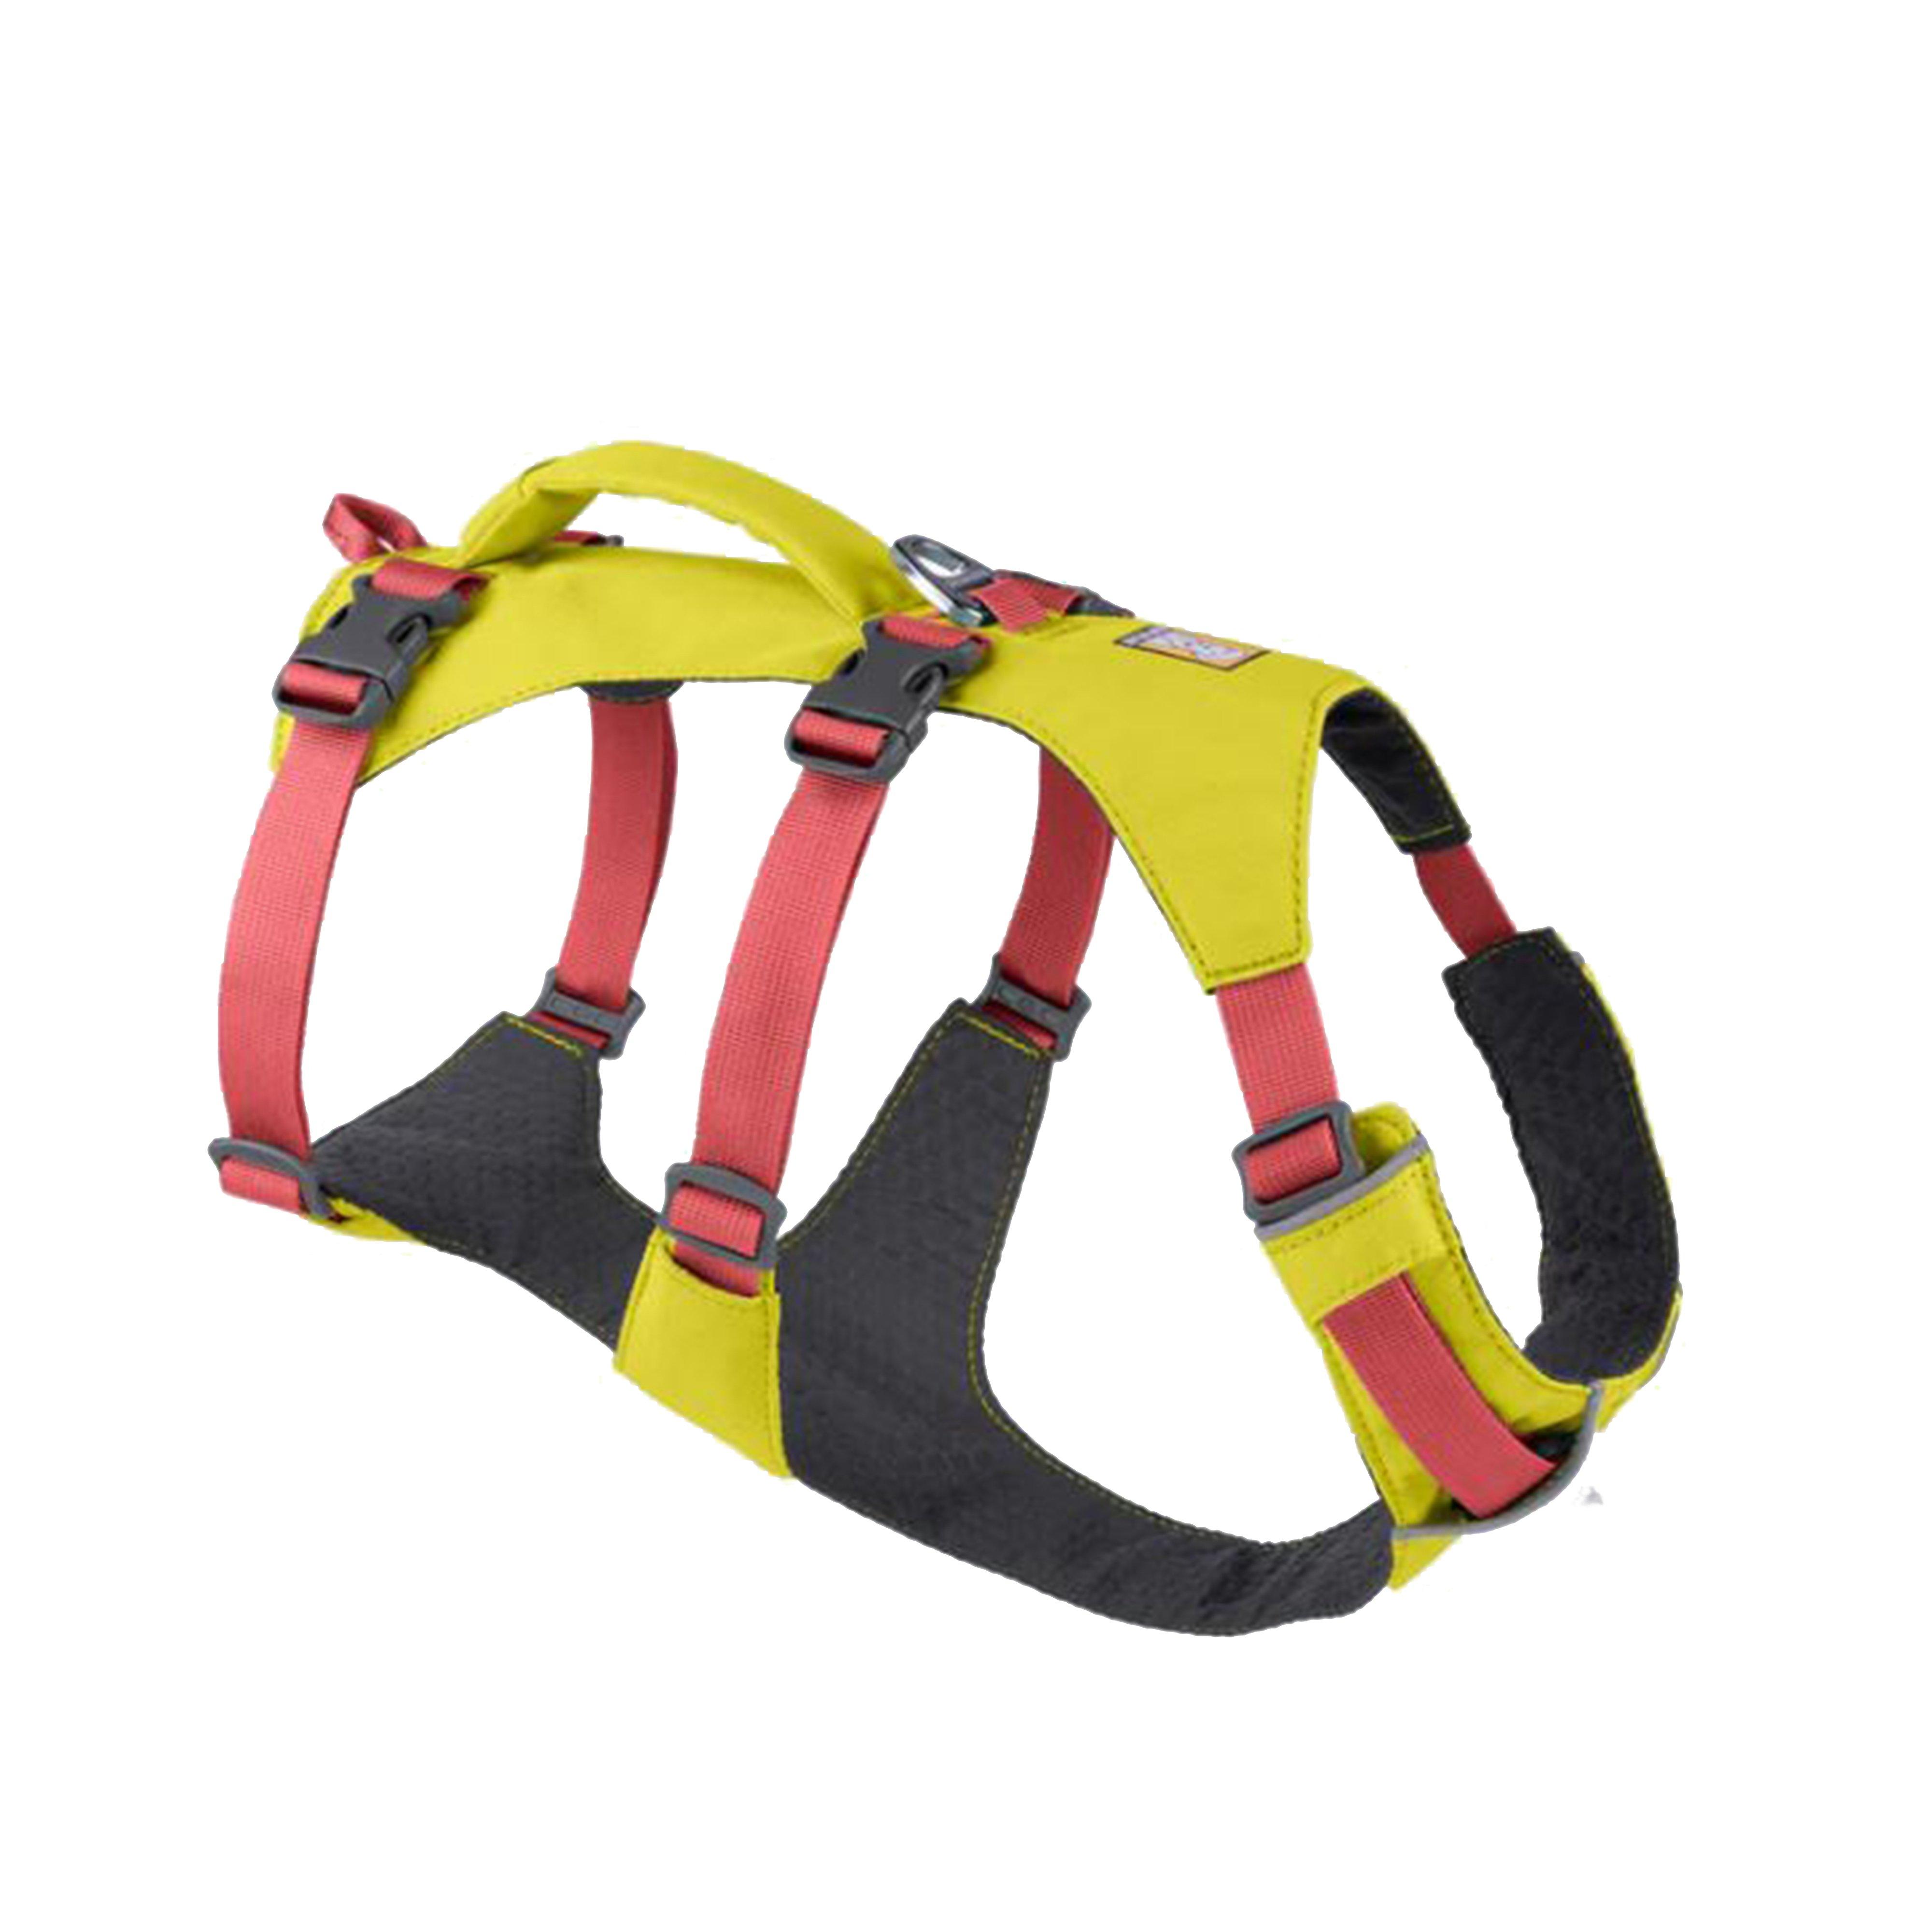 Flagline Harness With Handle Yellow/Red